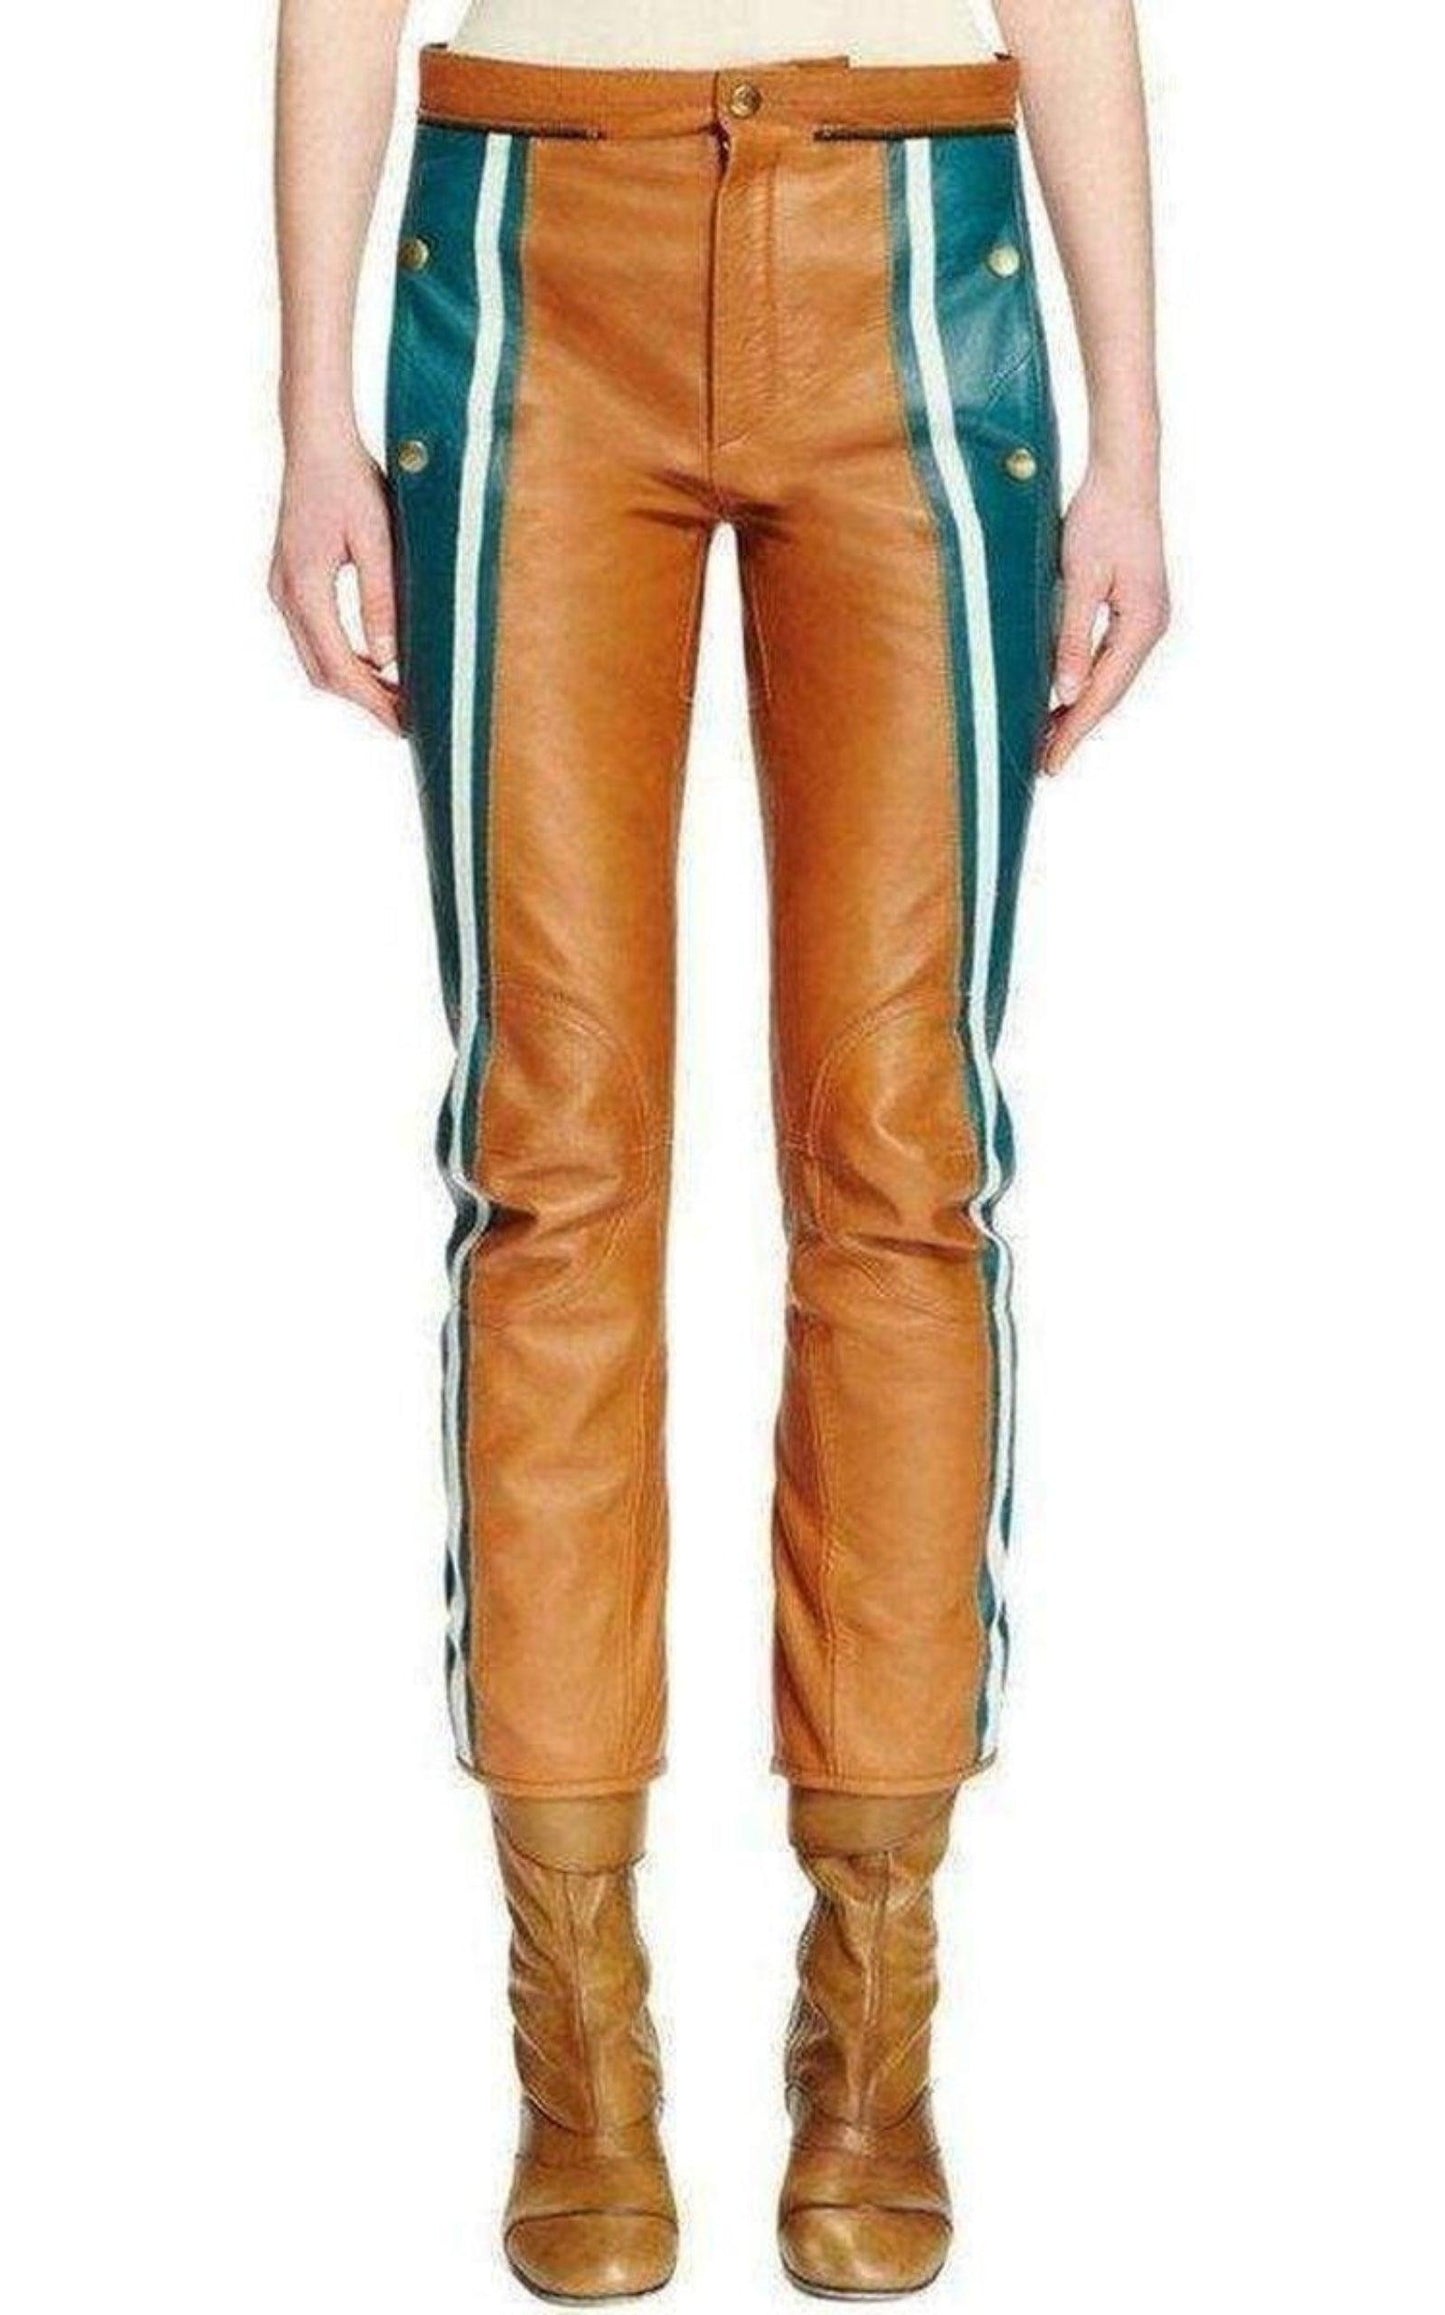  ChloeBiker Cropped Striped Leather Pants - Runway Catalog